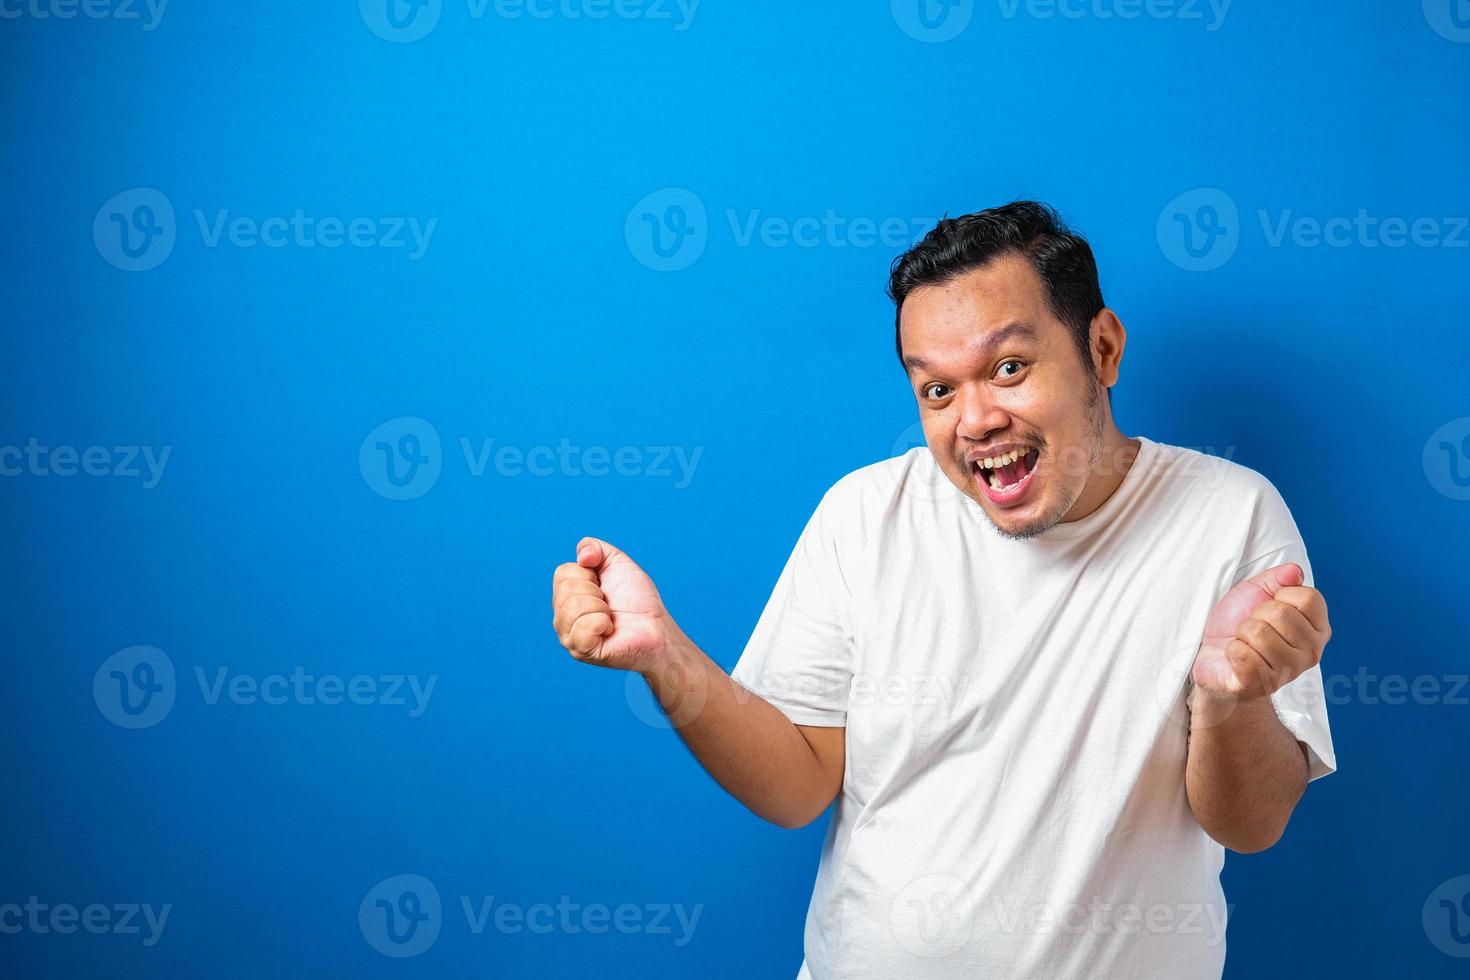 Portrait of a funny fat Asian man in white t-shirt smiling and dancing happily, joyful expressing celebrating good news victory winning success gesture against blue background photo